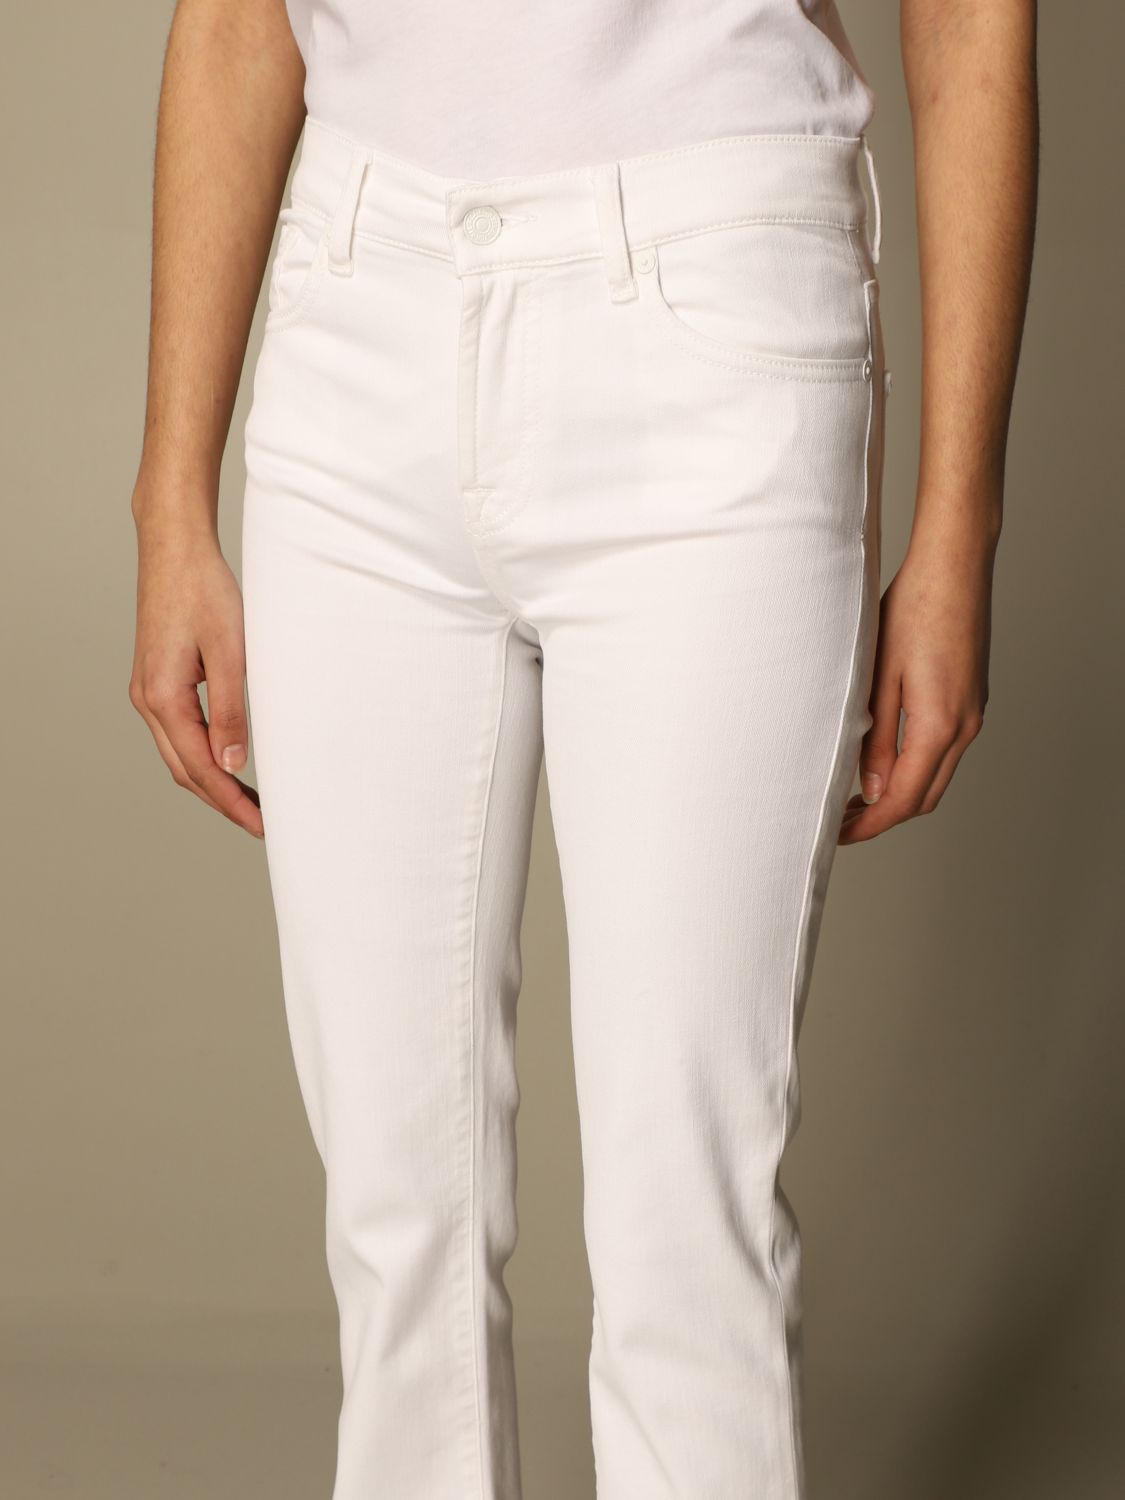 Jeans 7 For All Mankind: Jeans women 7 For All Mankind white 3